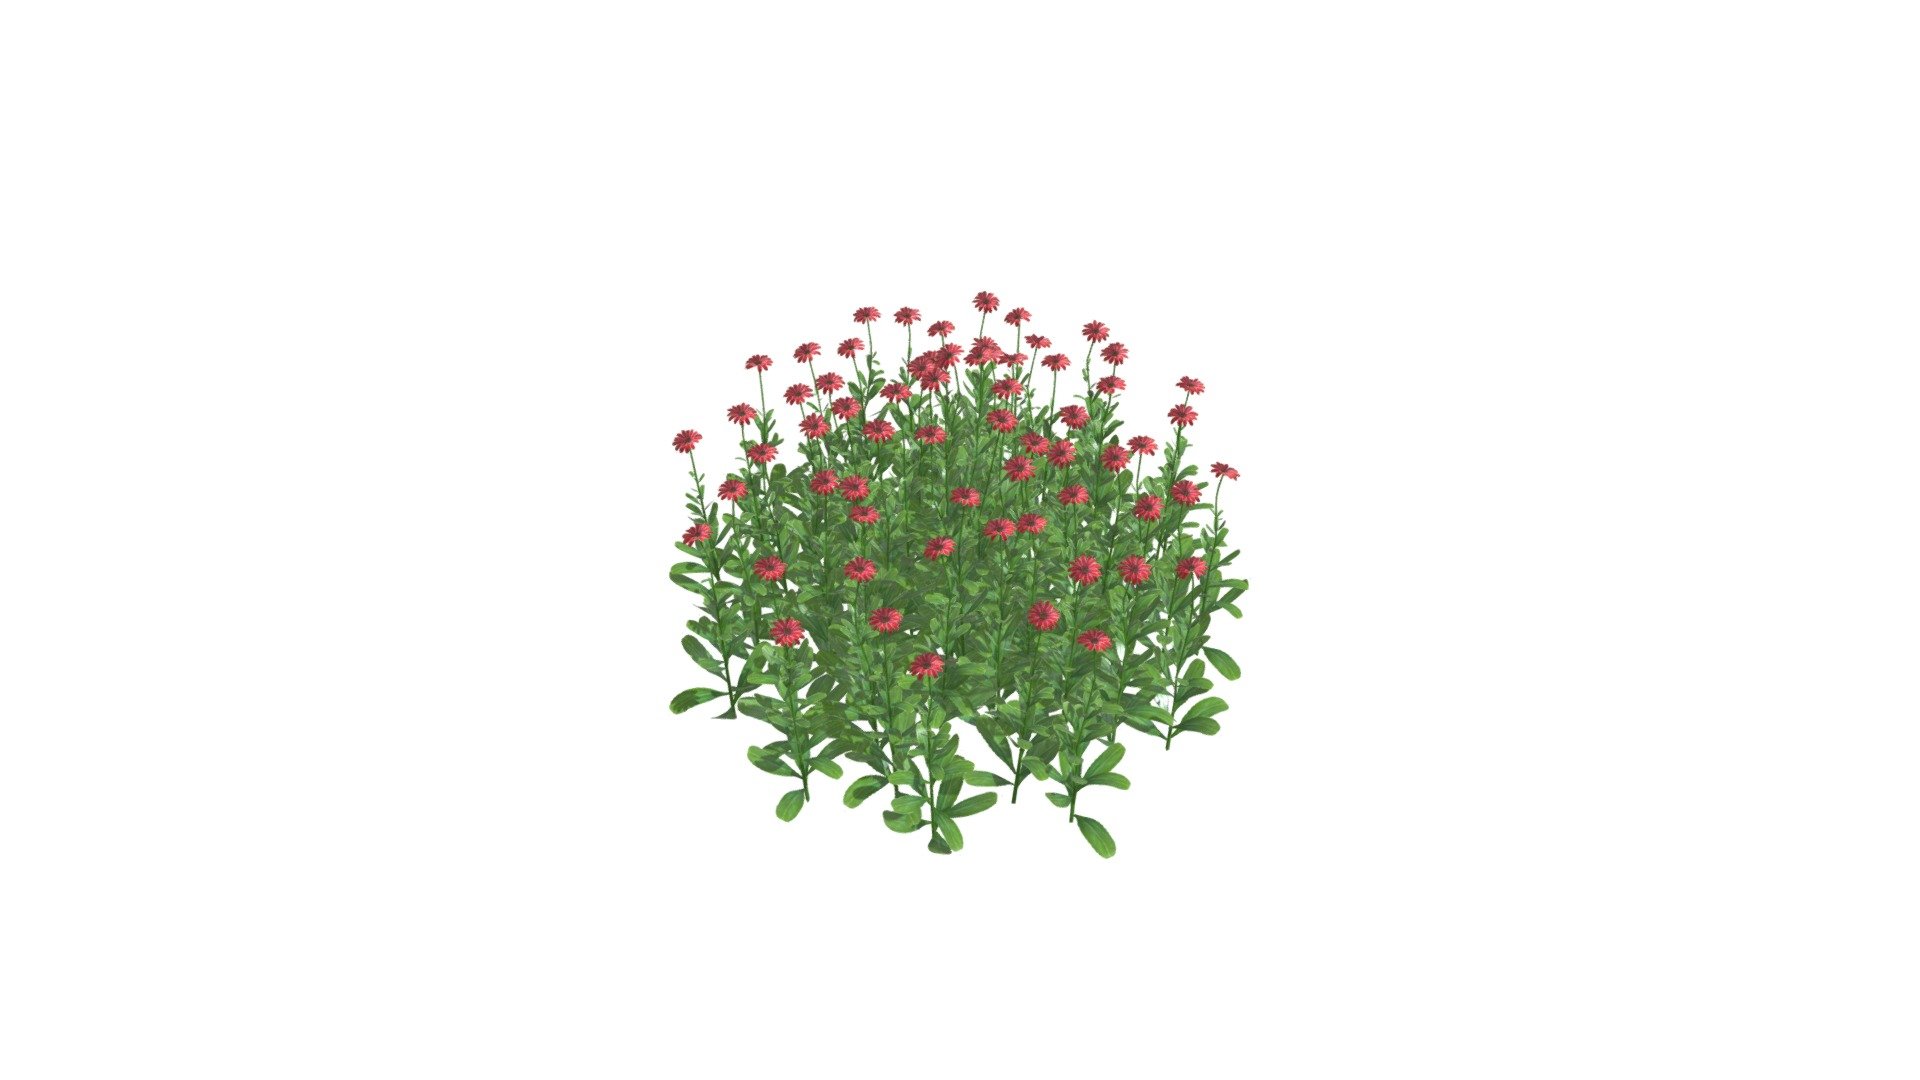 3D Daisy Flower Bush
- A beautiful and realistic 3D model of a daisy flower bush, available in three vibrant colors: red, pink, and white.
- Ideal for creating product visualizations, marketing materials, or even video games.
- Features a detailed and lifelike representation of daisy flowers, with delicate petals and vibrant colors.
- The bush is easy to use and customize, allowing you to adjust the size, color, and placement of the flowers to suit your needs.
- The model is compatible with various software formats, ensuring seamless integration into your existing workflow.

Key Features:
- Highly detailed 3D model of a daisy flower bush
- Low poly model, Optimized for efficient rendering and gaming
- The model is UV-mapped and ready for texture application.
- High-resolution textures

Check out this animation I made using Unreal Engine:
https://youtu.be/bDyiXkySgnM

Dimensions: real world scale can be scaled.
Wide: 180 cm
Height: 90 cm - Daisy Red Flower Bush - Buy Royalty Free 3D model by hkhalif 3d model